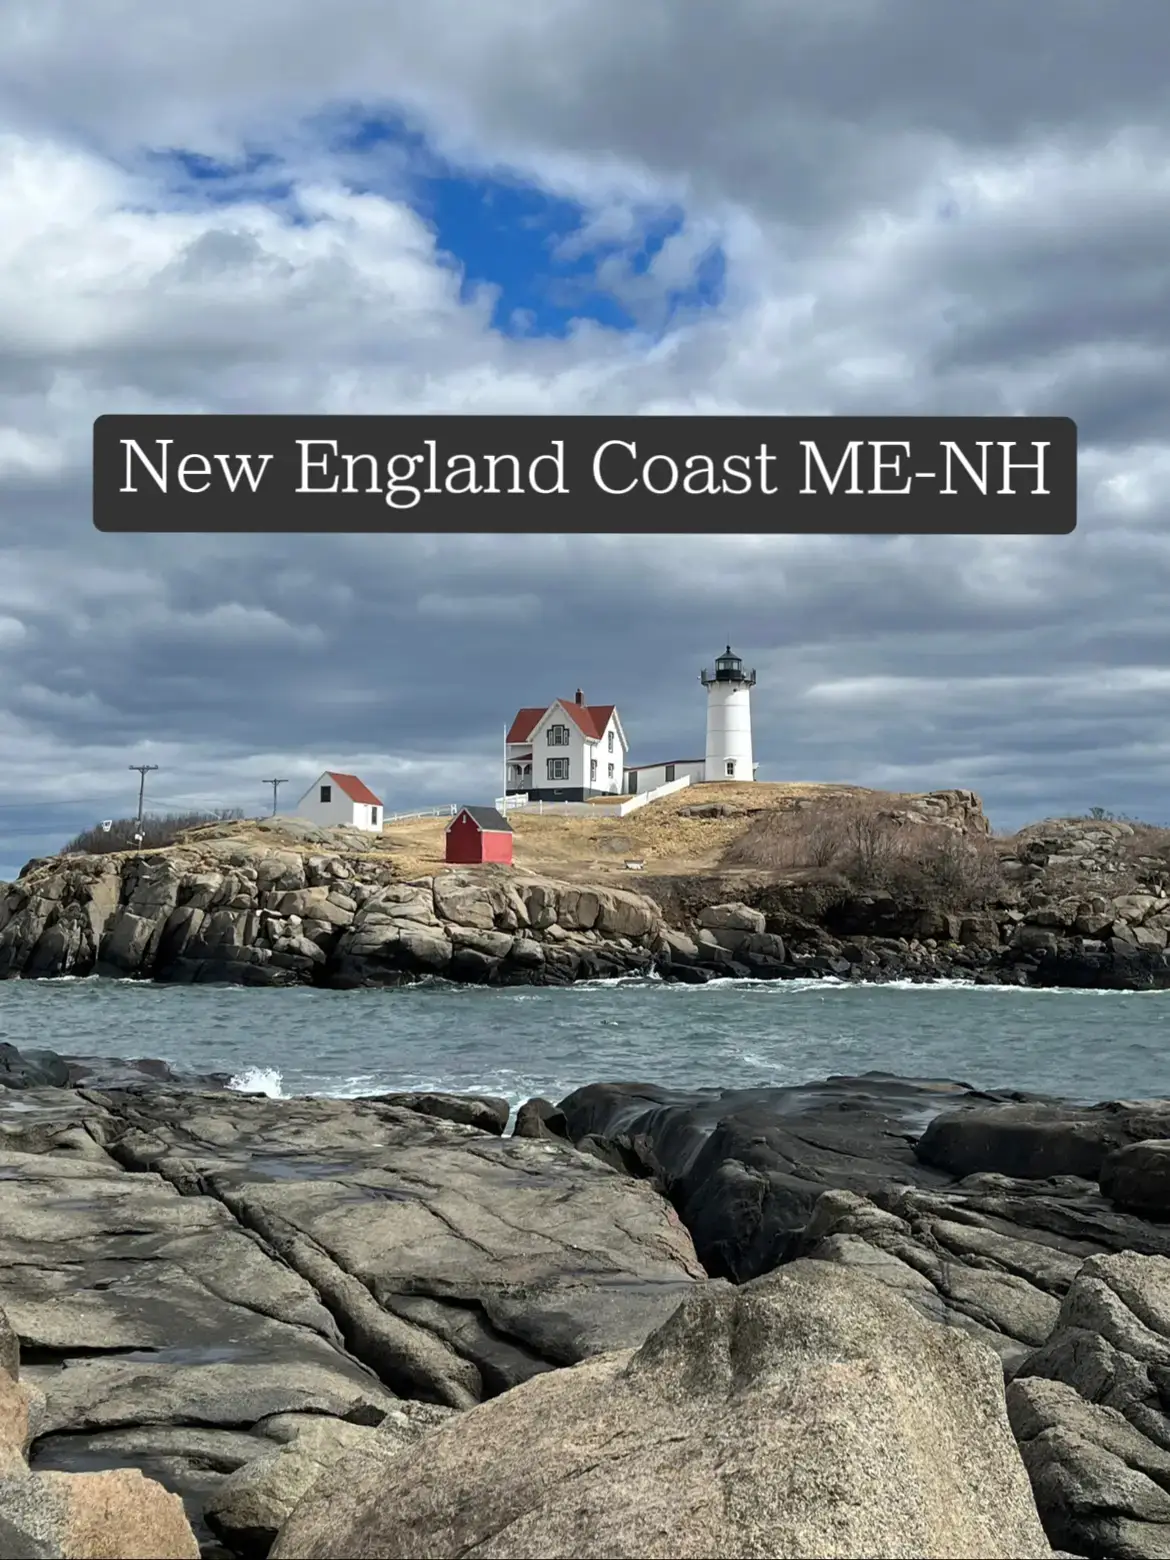 New England Sunday, Video published by dorothy